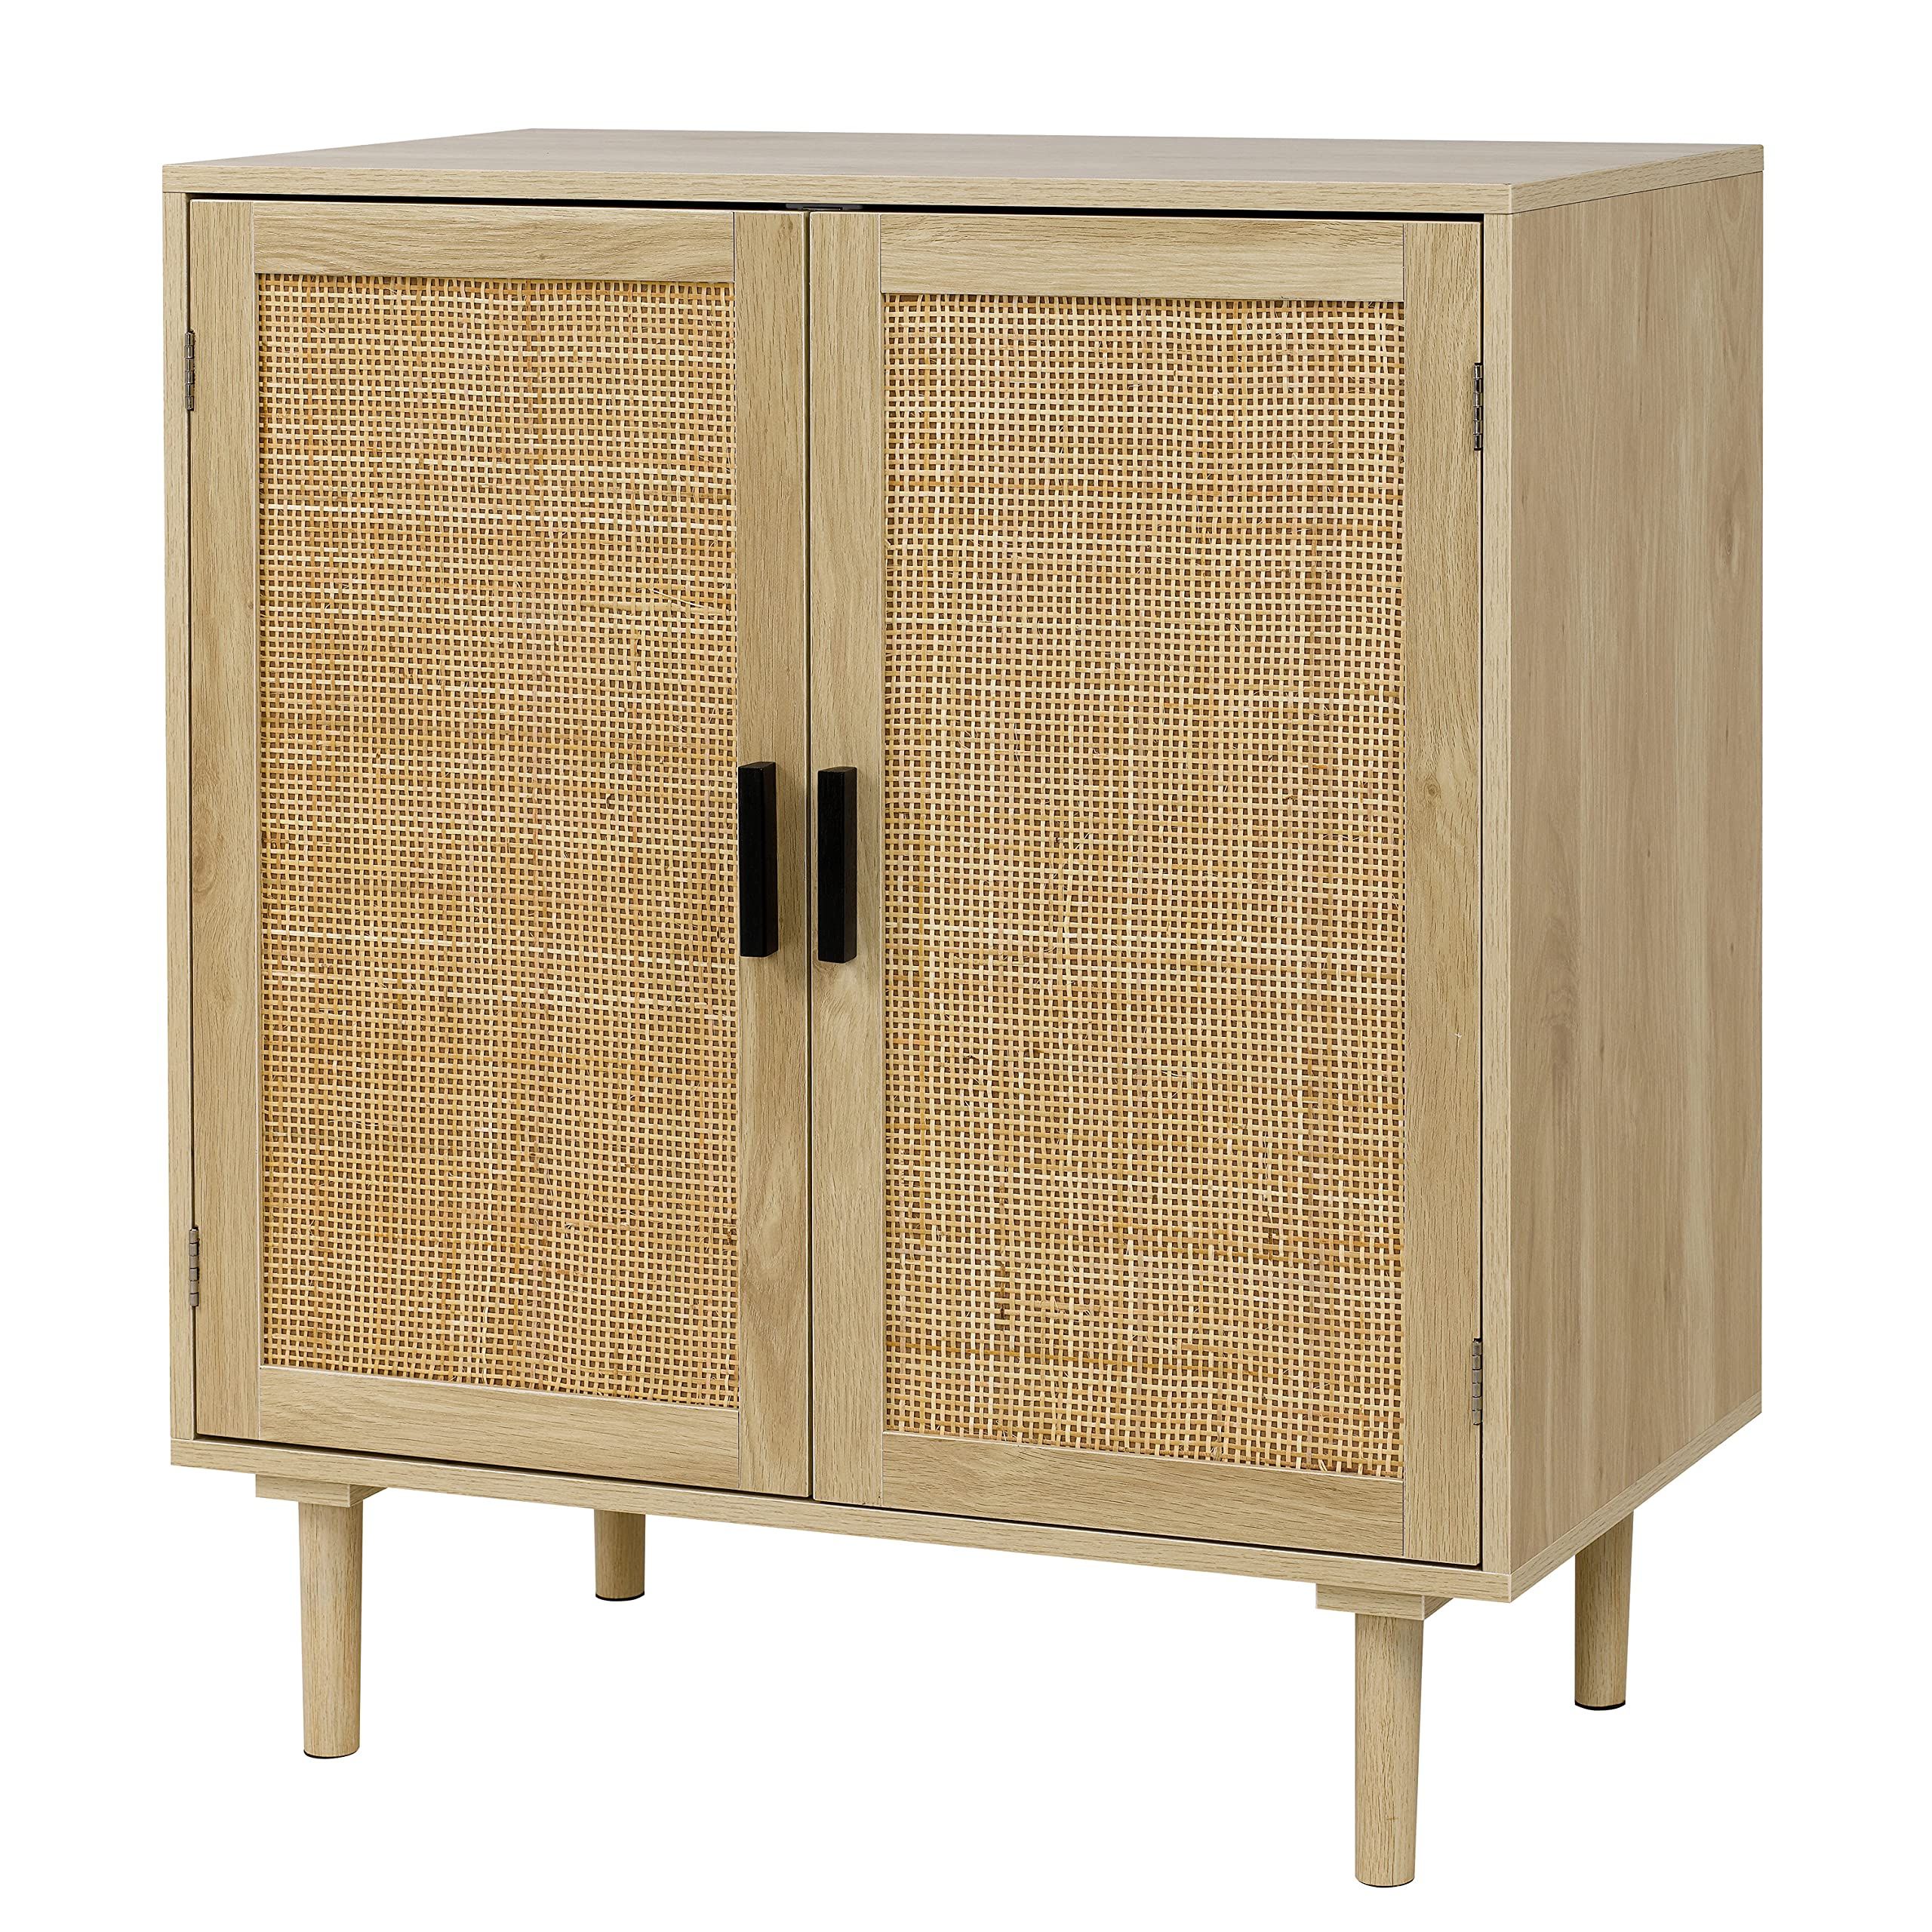 Finnhomy Sideboard Buffet Kitchen Storage Cabinet with Rattan Decorated Doors, Dining Room, Hallway, Cupboard Console Table, Liquor / Accent Cabinet, 31.5X 15.8X 34.6 Inches, Natural | Amazon (US)